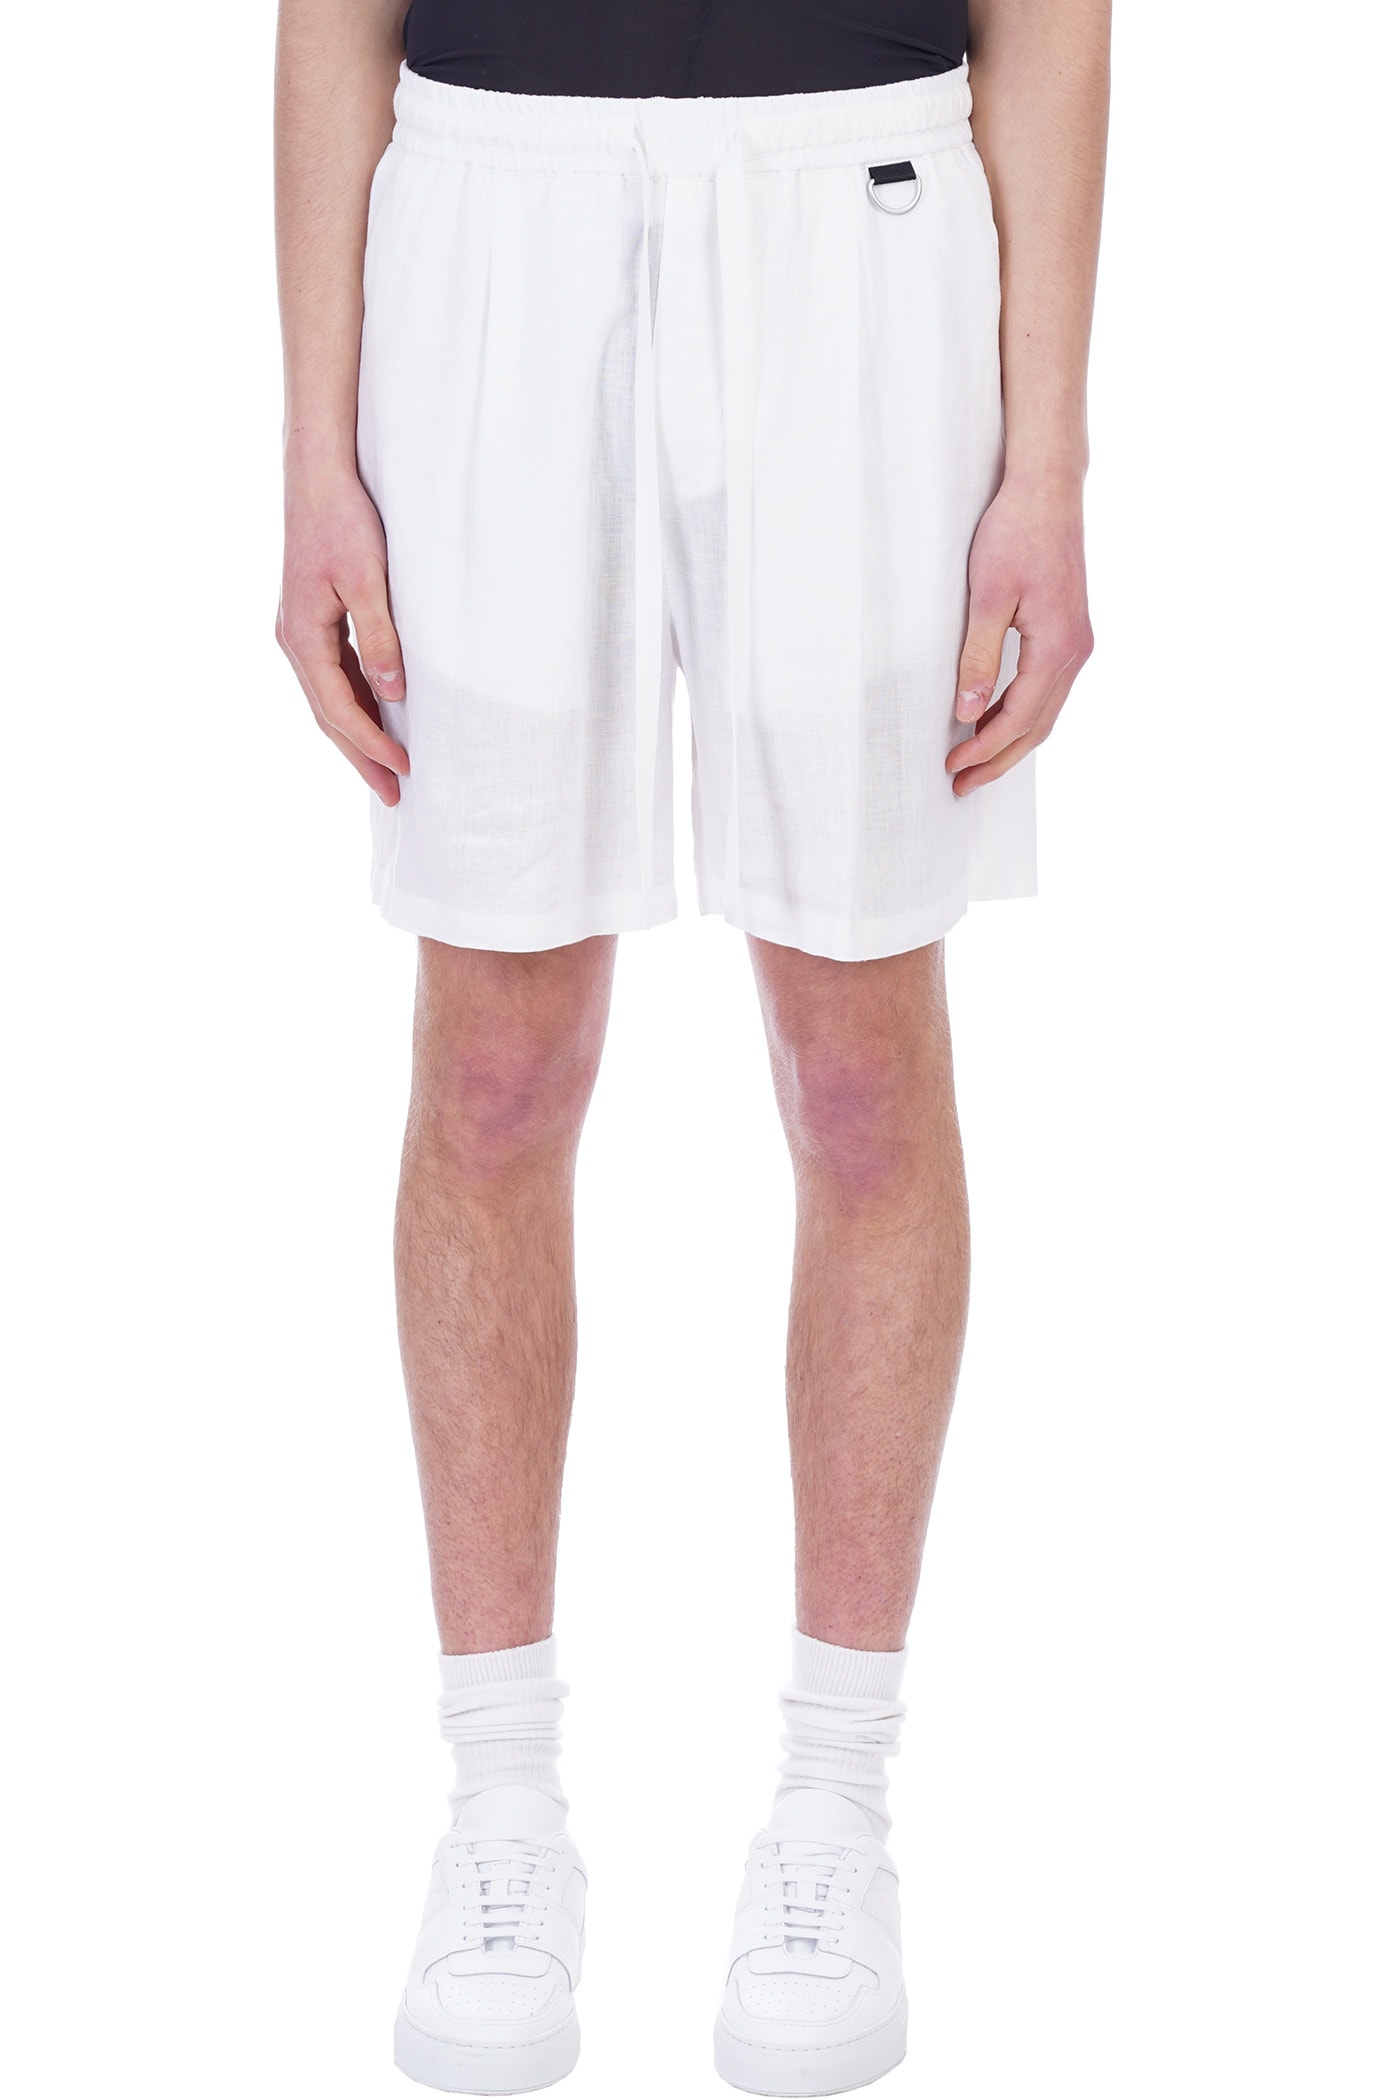 Low Brand Shorts In White Linen